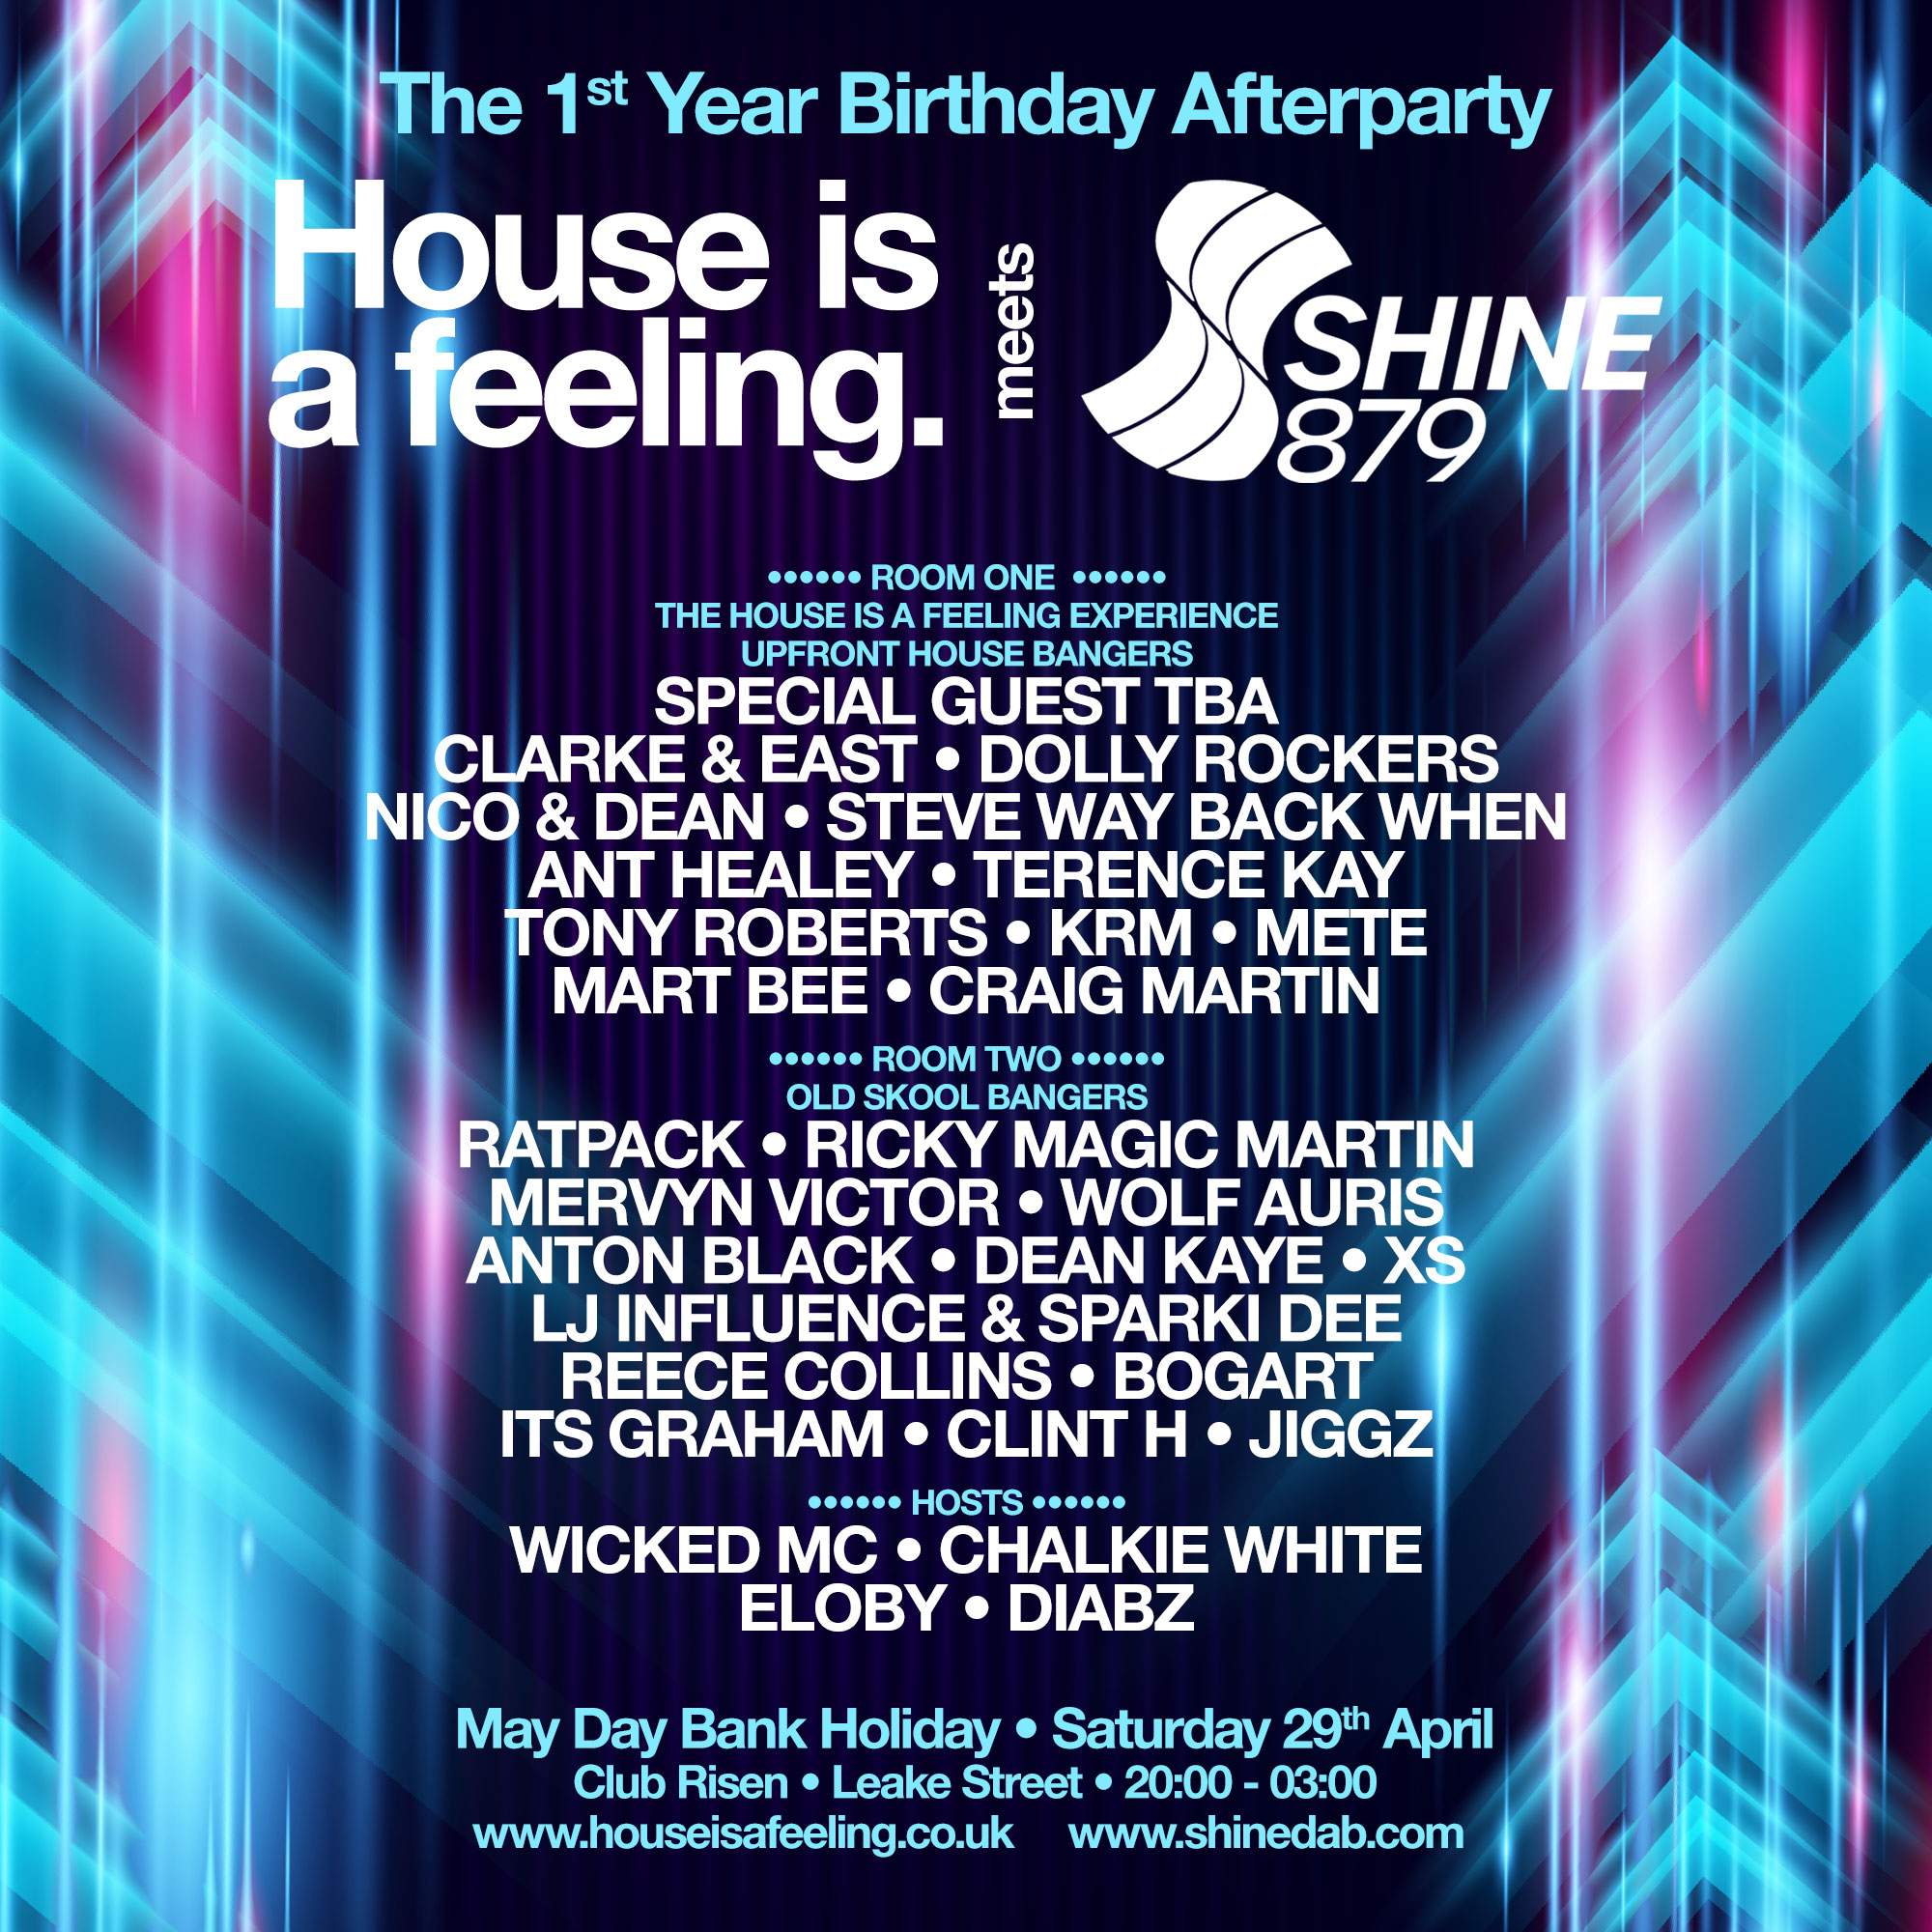 House is a feeling meets shine 879 dab 1st birthday bash boat party & after party - フライヤー裏